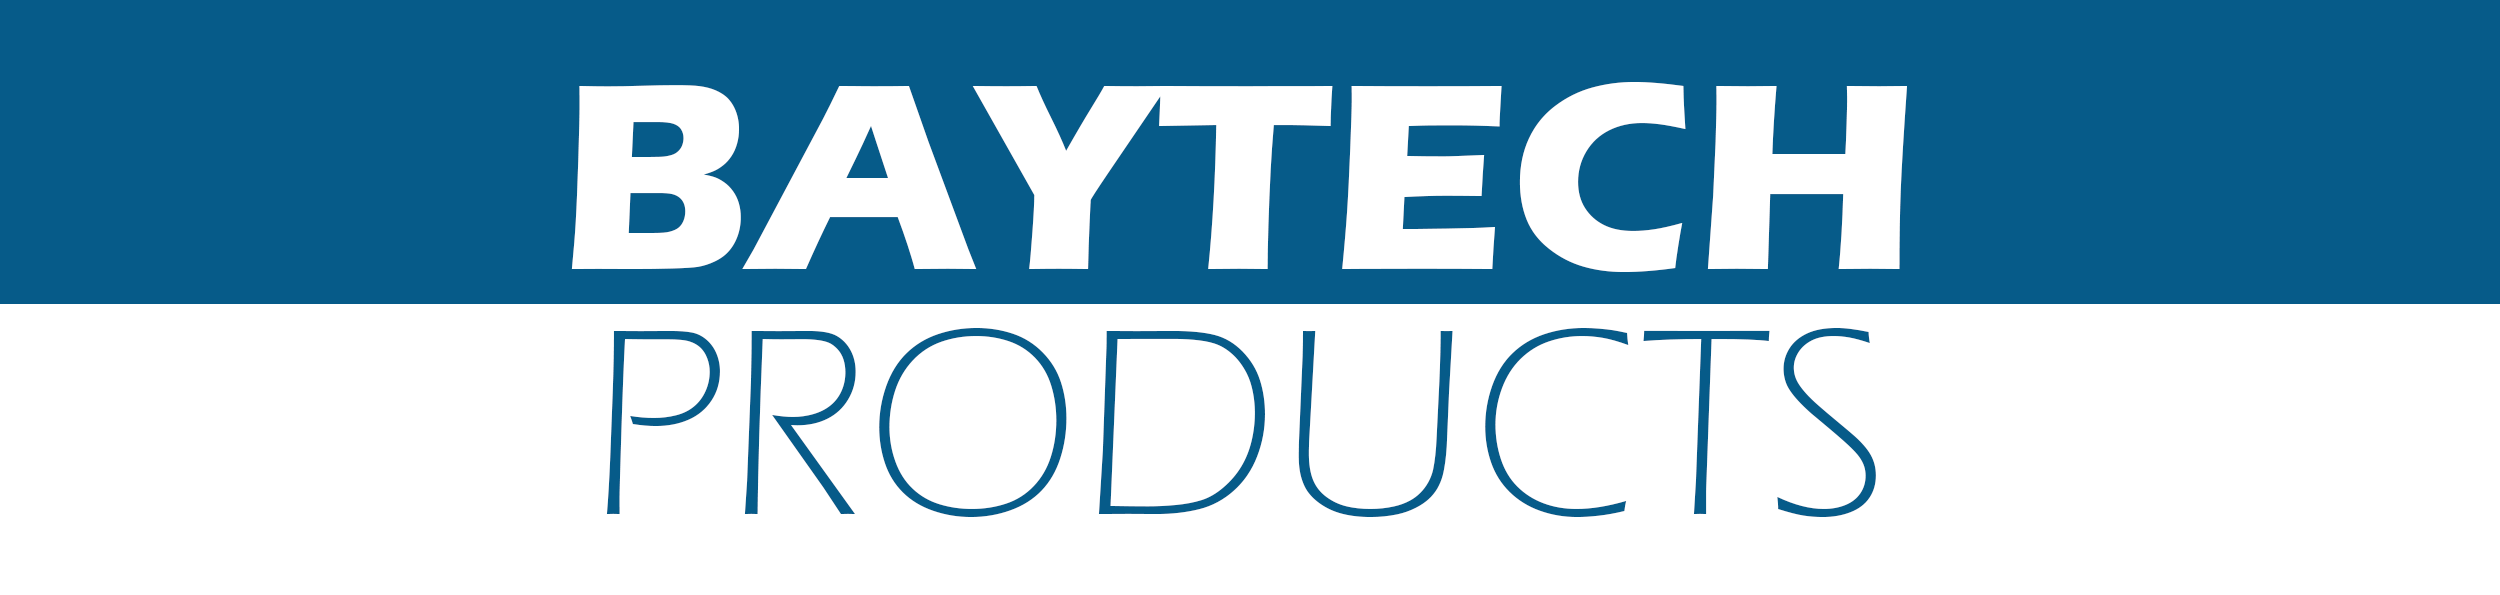 Baytech Products